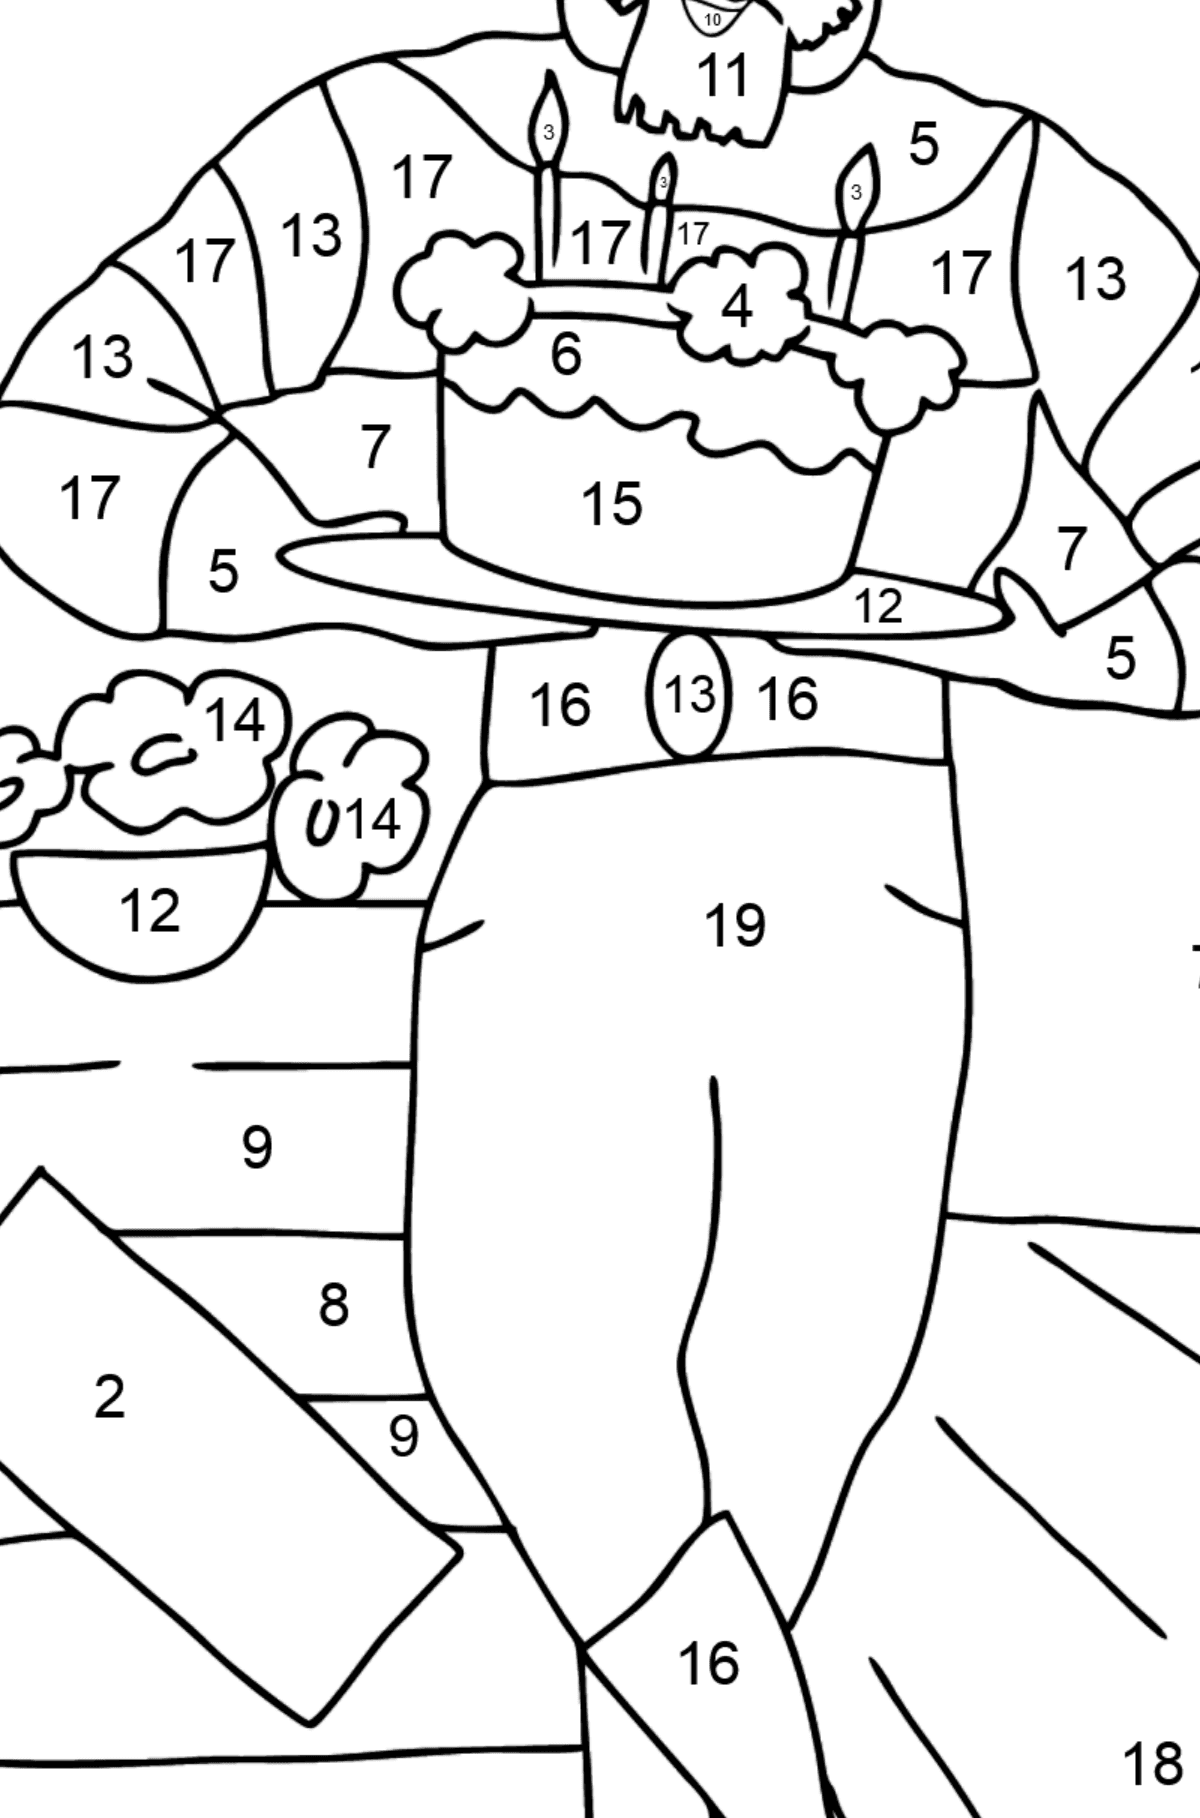 Coloring Page - A Pirate with Cake - Coloring by Numbers for Kids